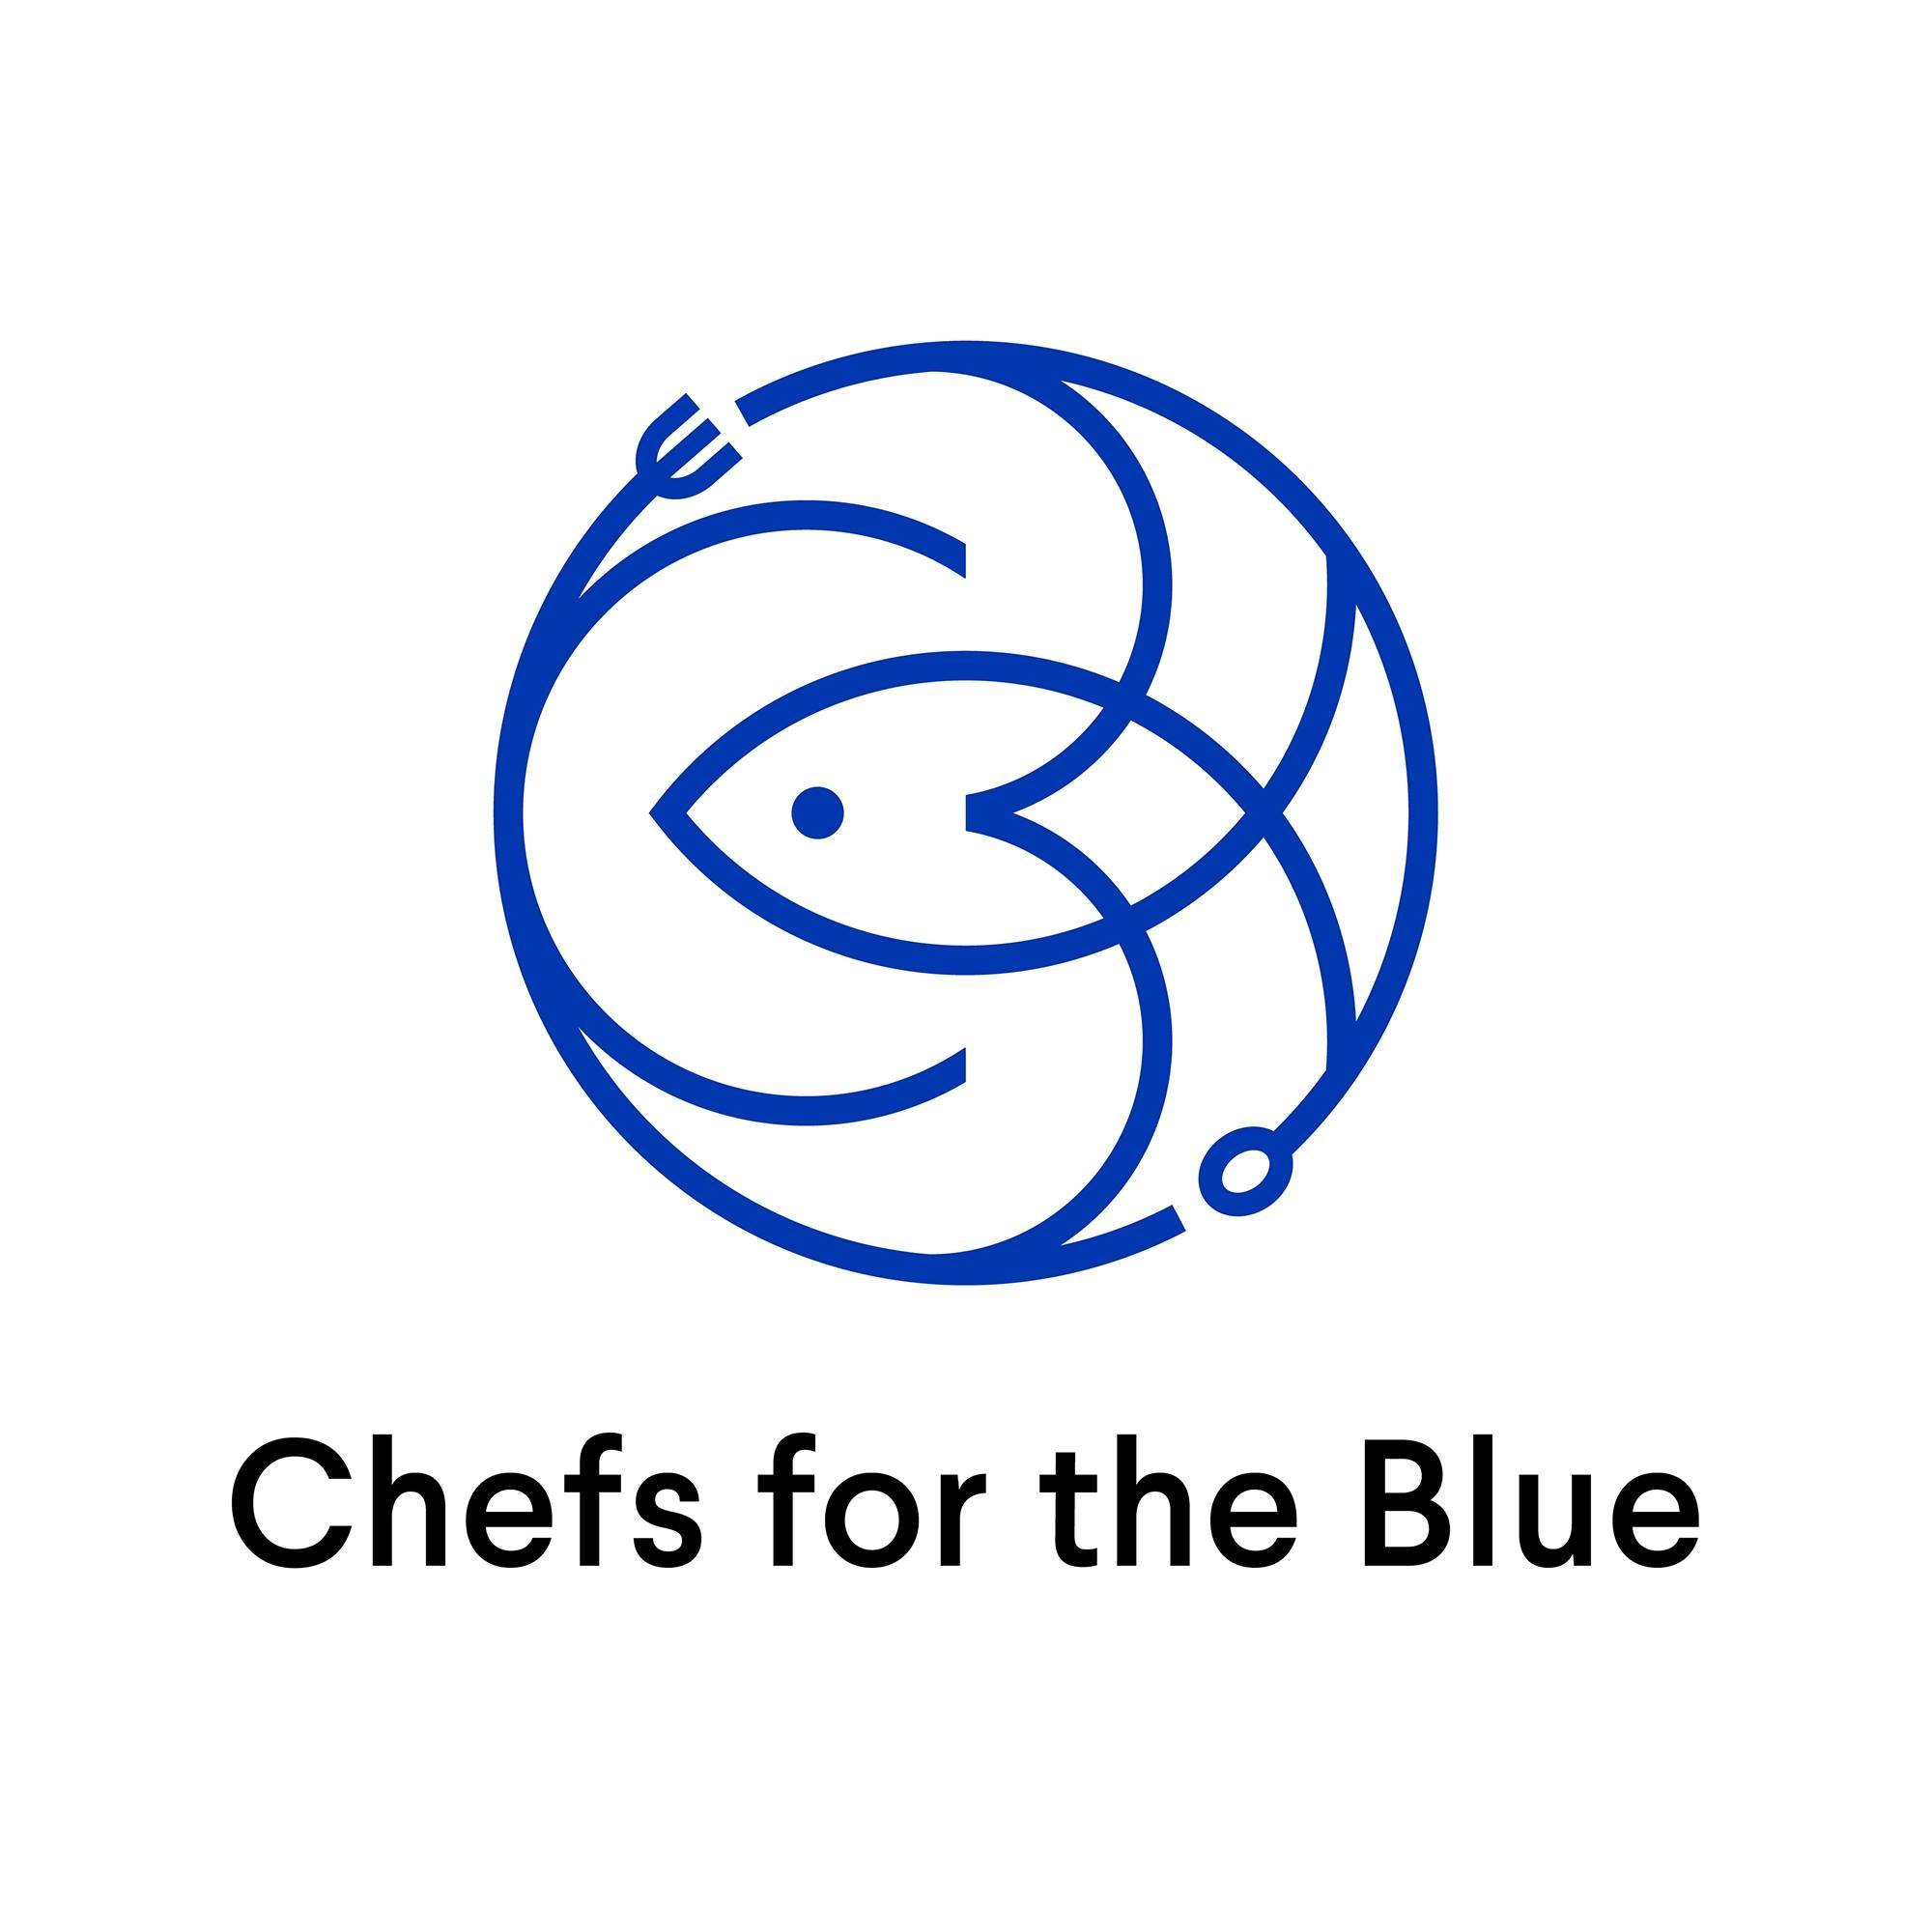 Chefs for the Blue